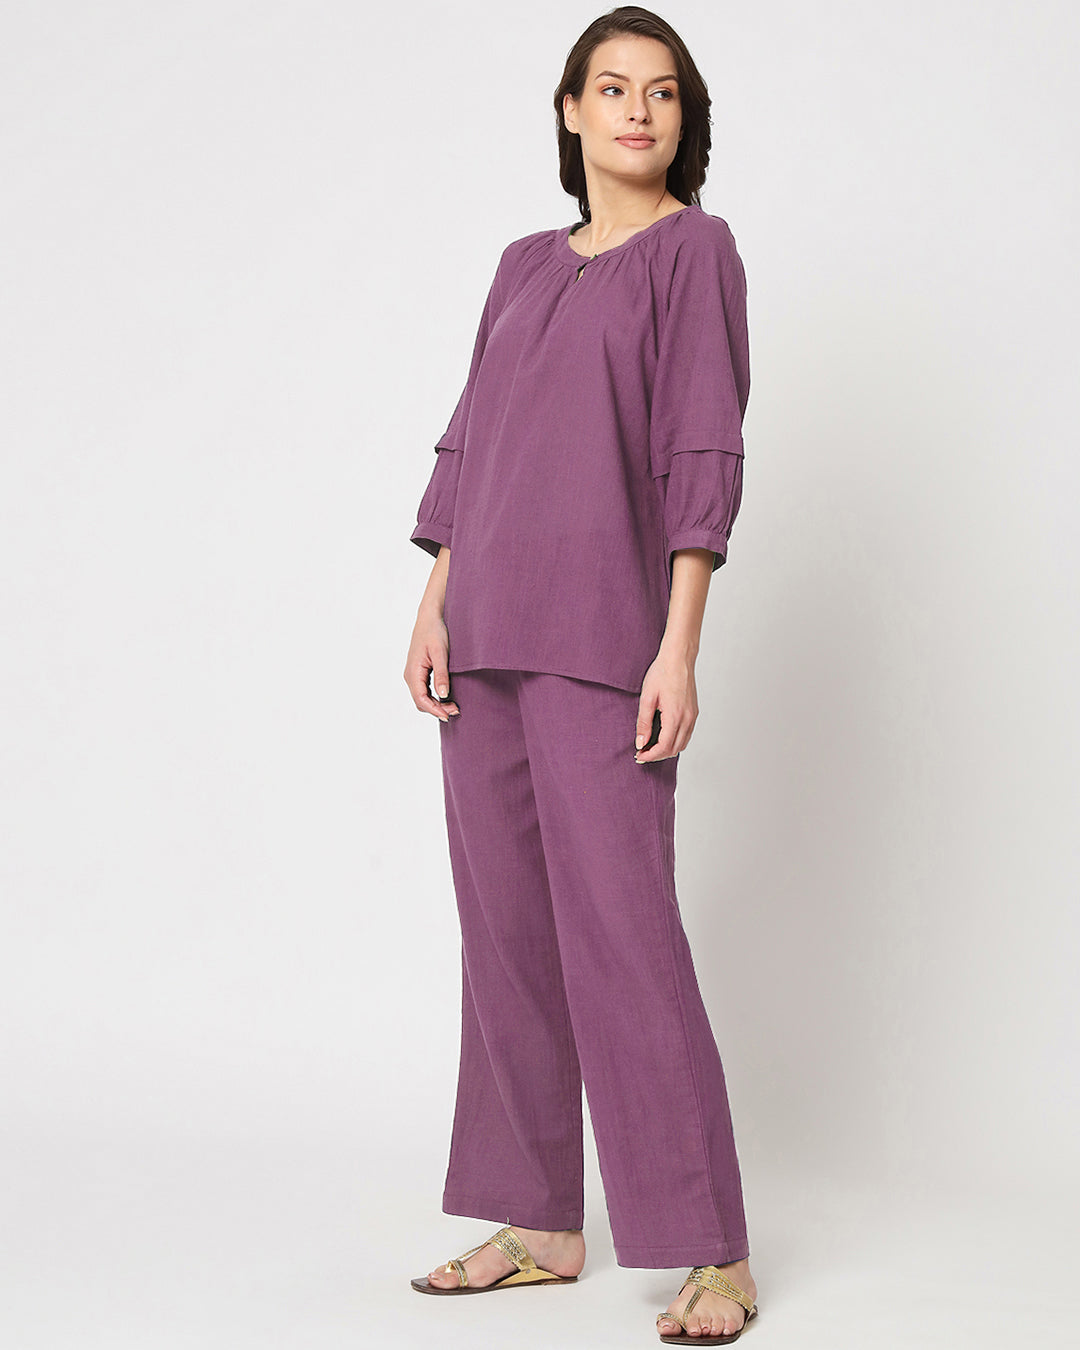 Wisteria Purple Button Neck Solid Top (Without Bottoms)